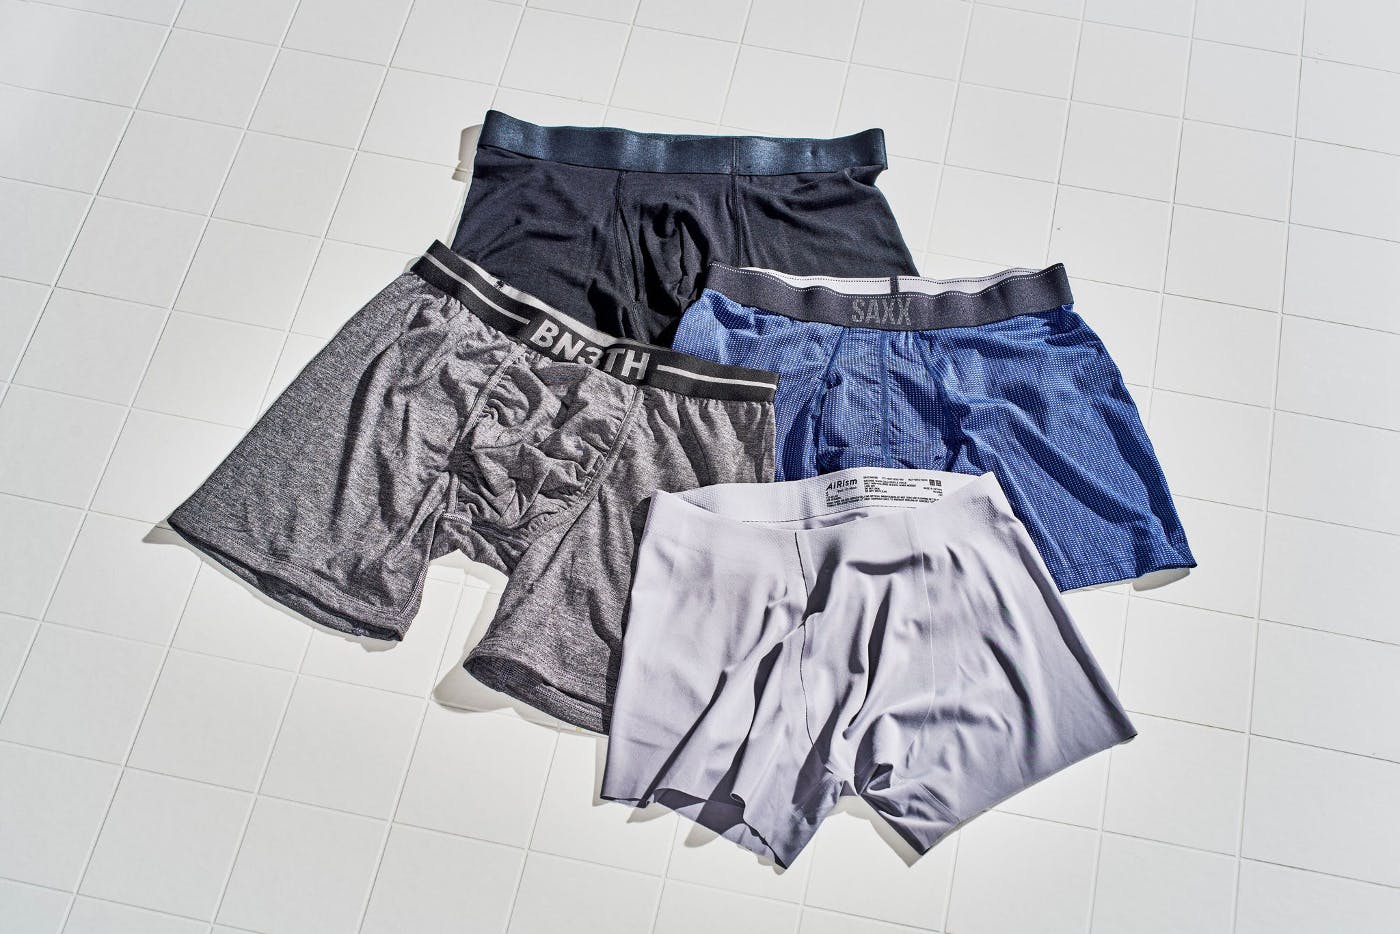 4 pairs of men's boxer briefs silver, gray, blue and black